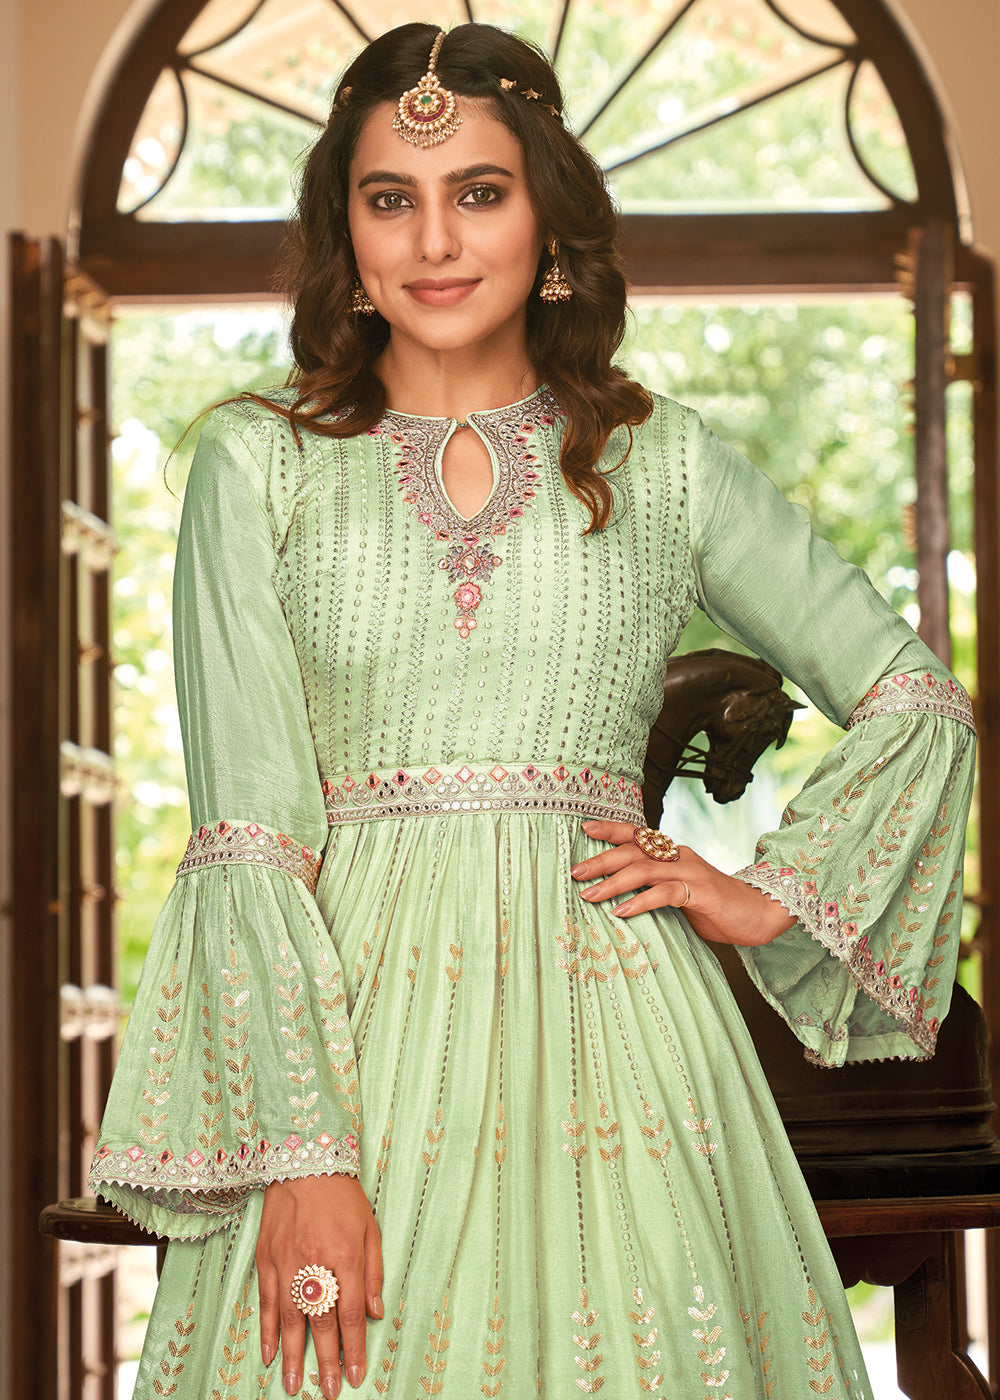 Buy Now Sharara Top Style Green Heavy Chinon Lehenga Skirt Suit Online in USA, UK, Canada & Worldwide at Empress Clothing.